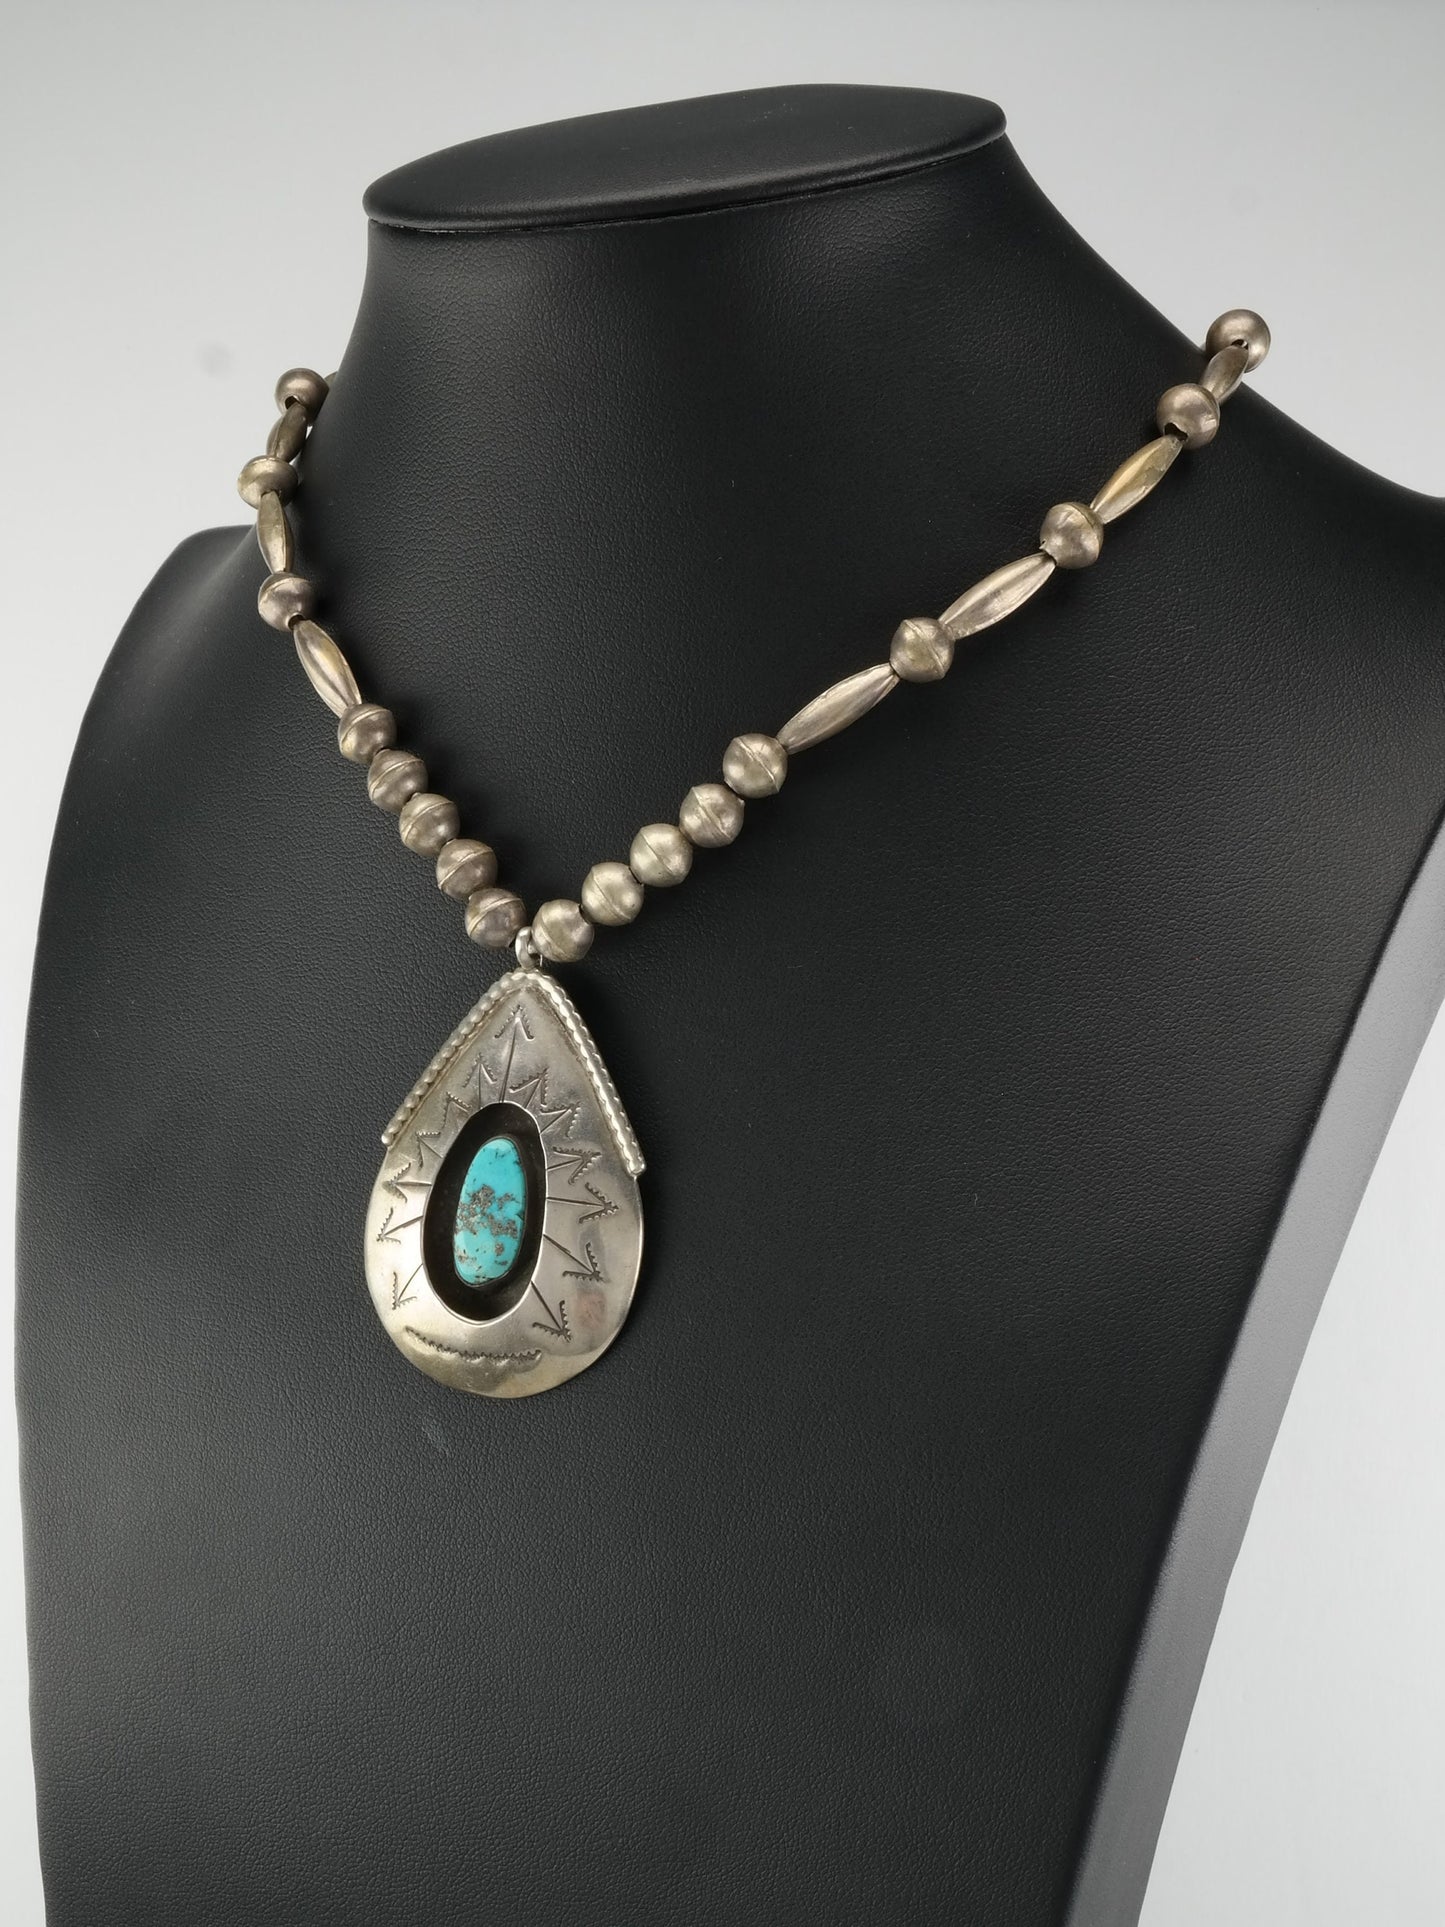 Vintage Native American Turquoise Shadowbox Necklace Sterling Silver